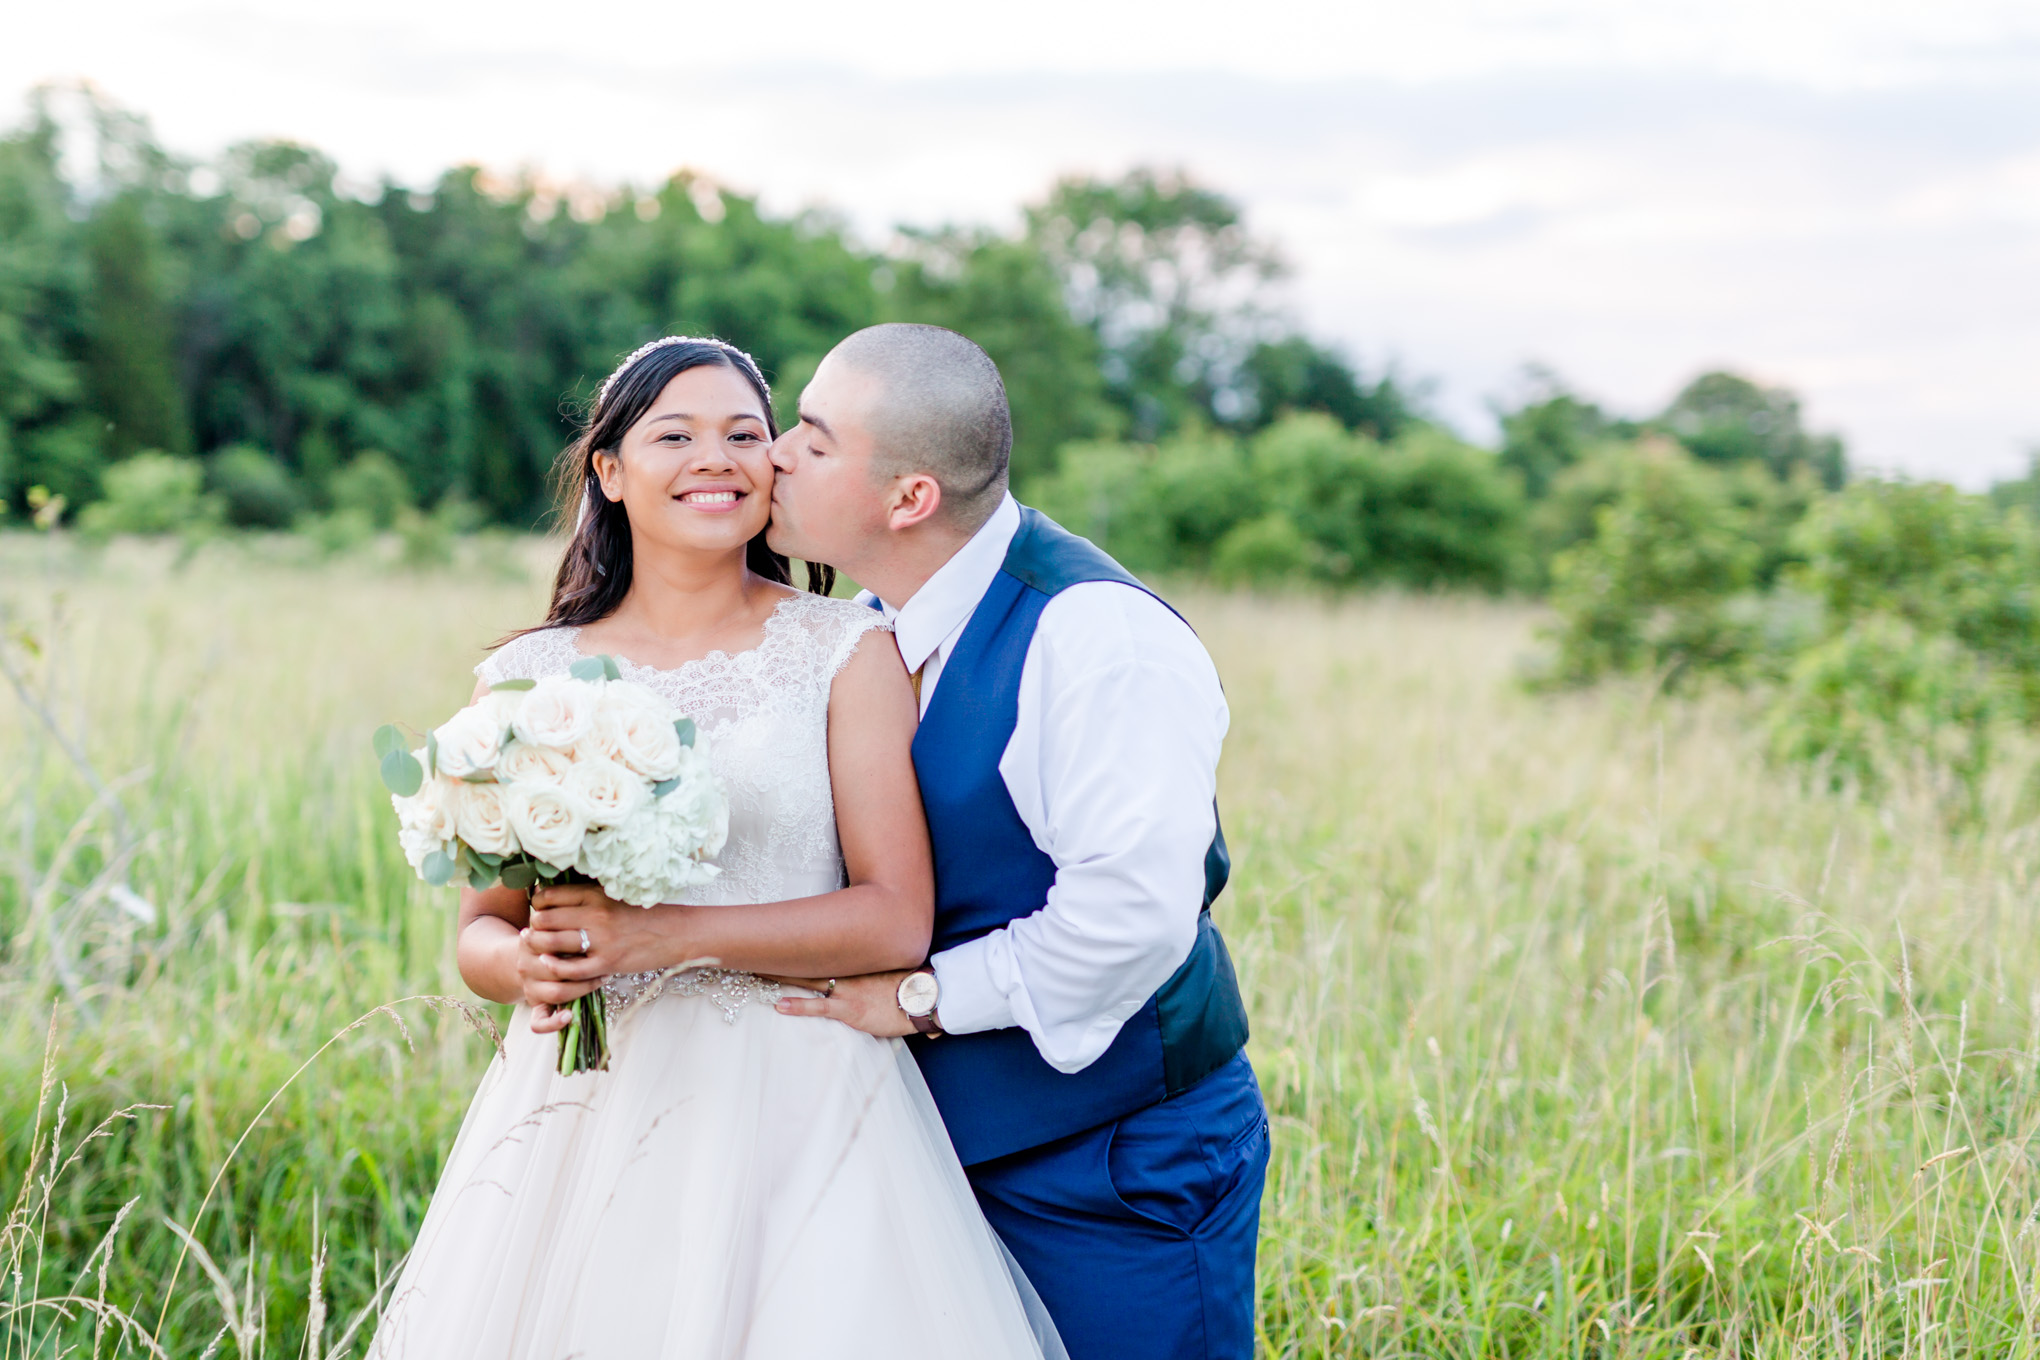 staycation over, staycation, bride and groom, wedding portraits, Rust Manor House